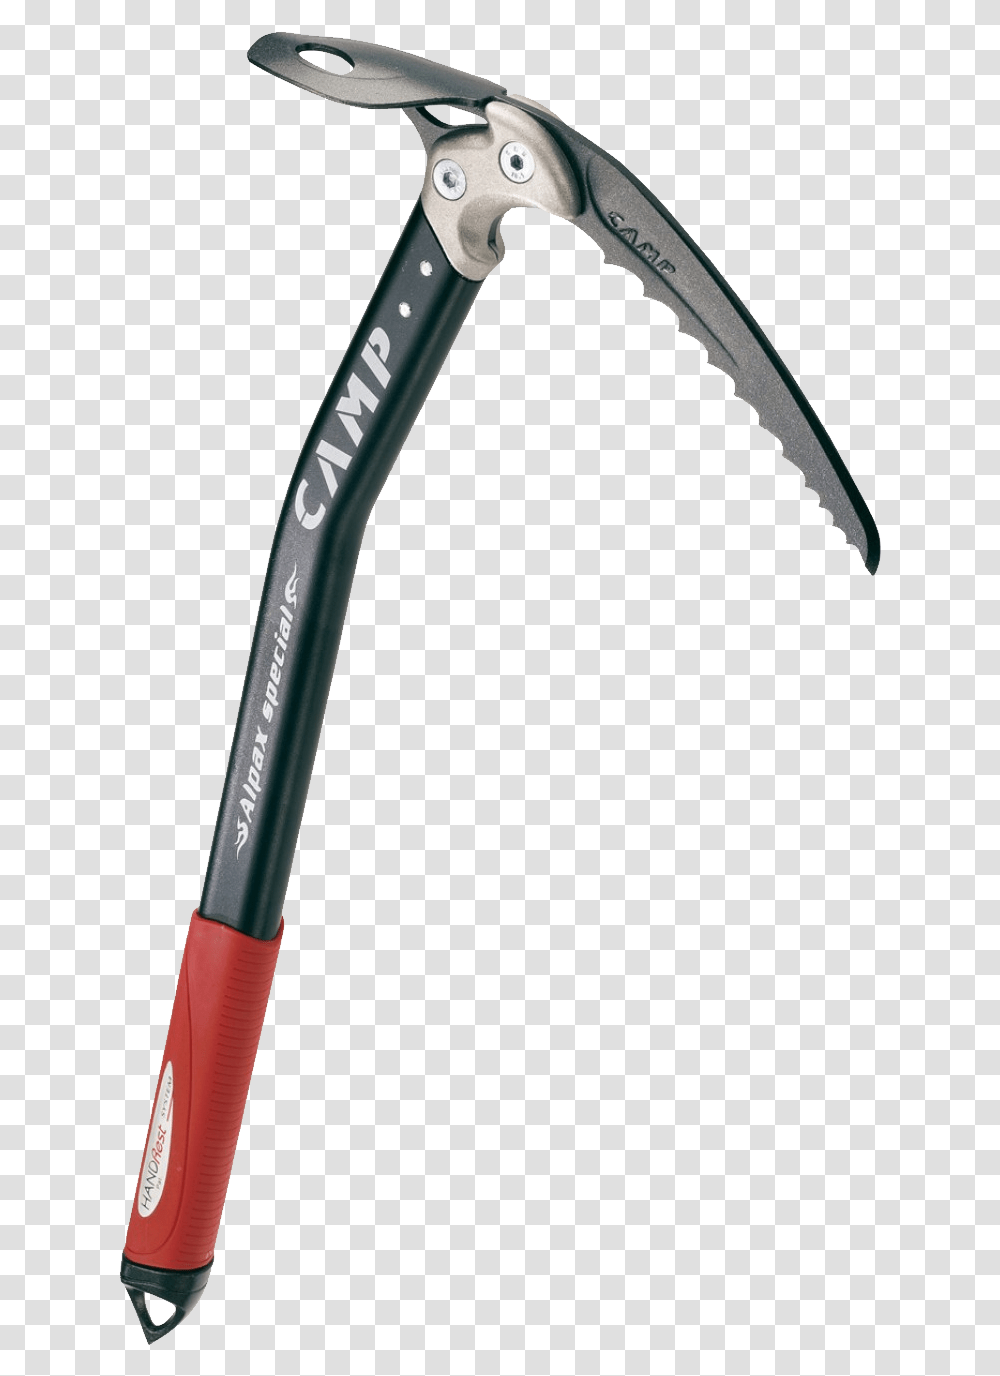 Download Ice Axe Image For Free Ice Axe, Tool, Hammer, Brush, Toothbrush Transparent Png